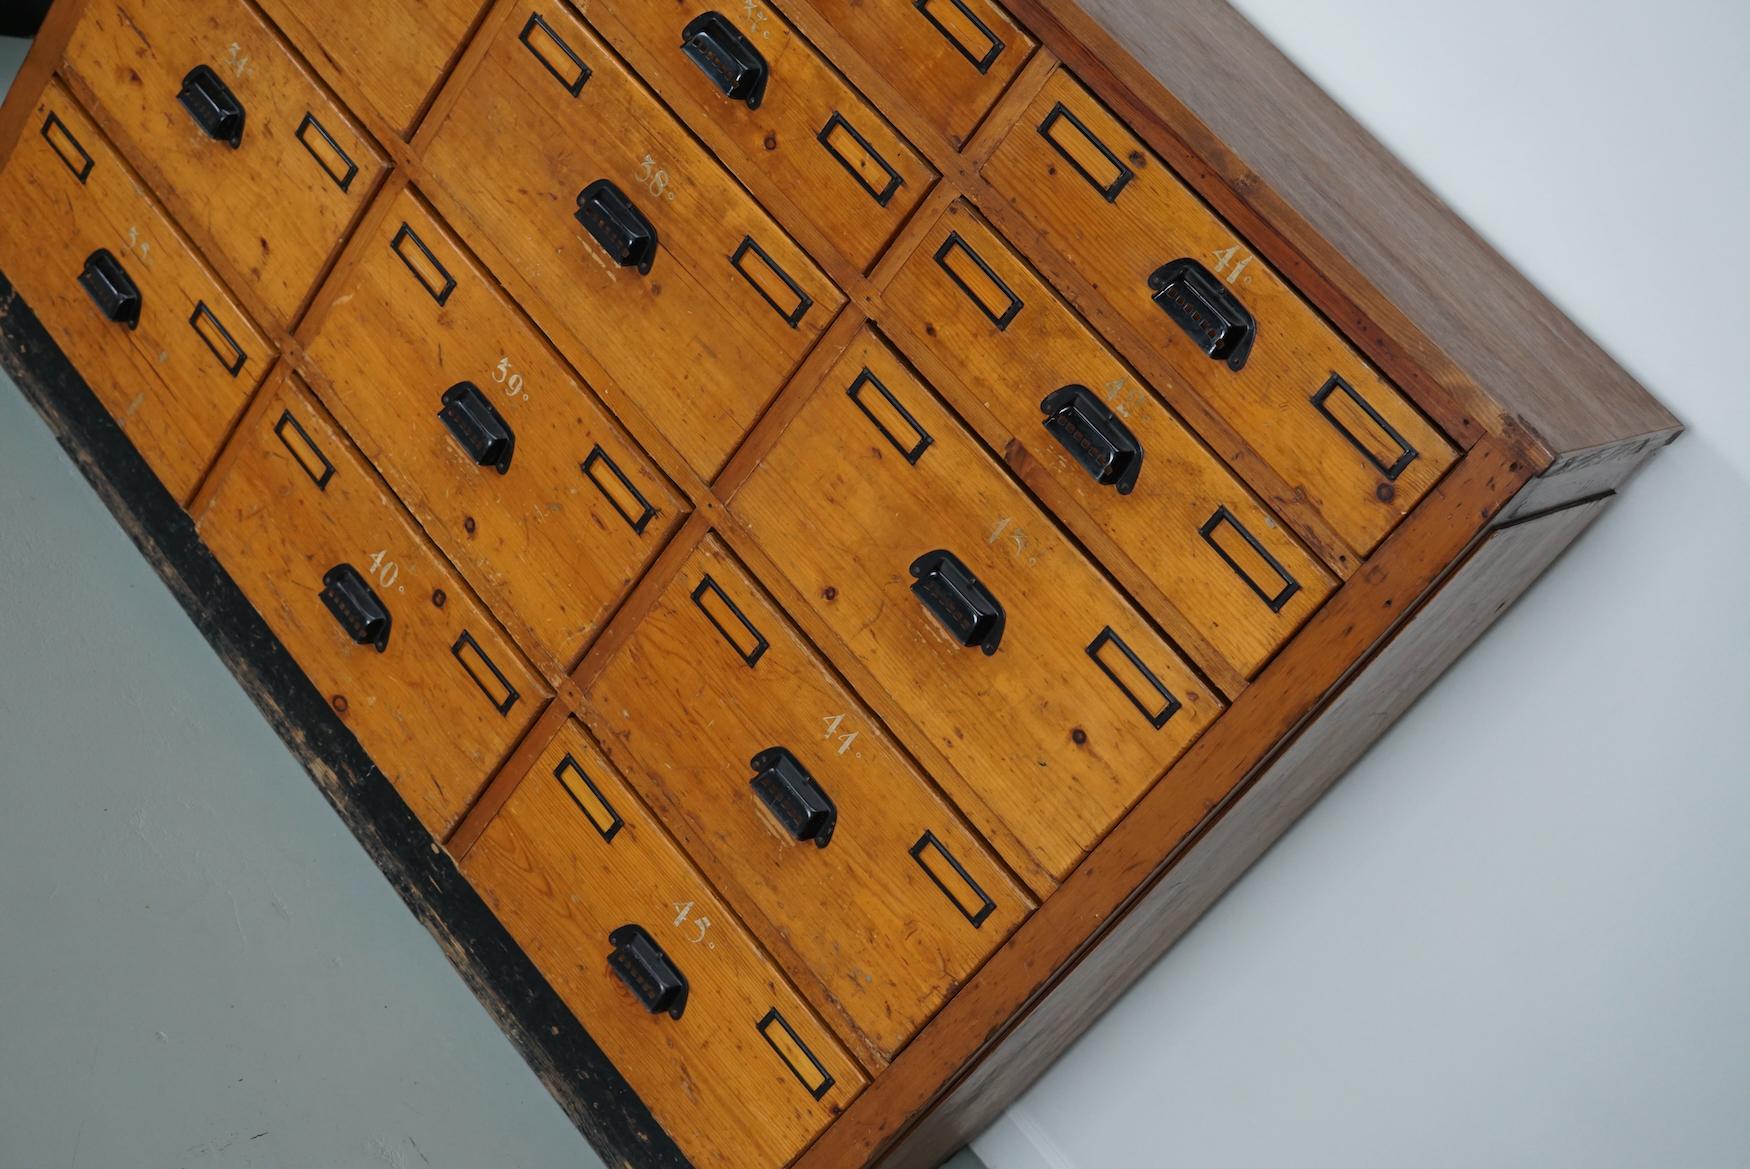 This workshop cabinet was made from pine in the Netherlands circa 1930s and it was used in a workshop for dentist equipment. It features many drawers with nice handles and name card holders. The interior dimensions of the drawers are: DWH 35 x 37 x